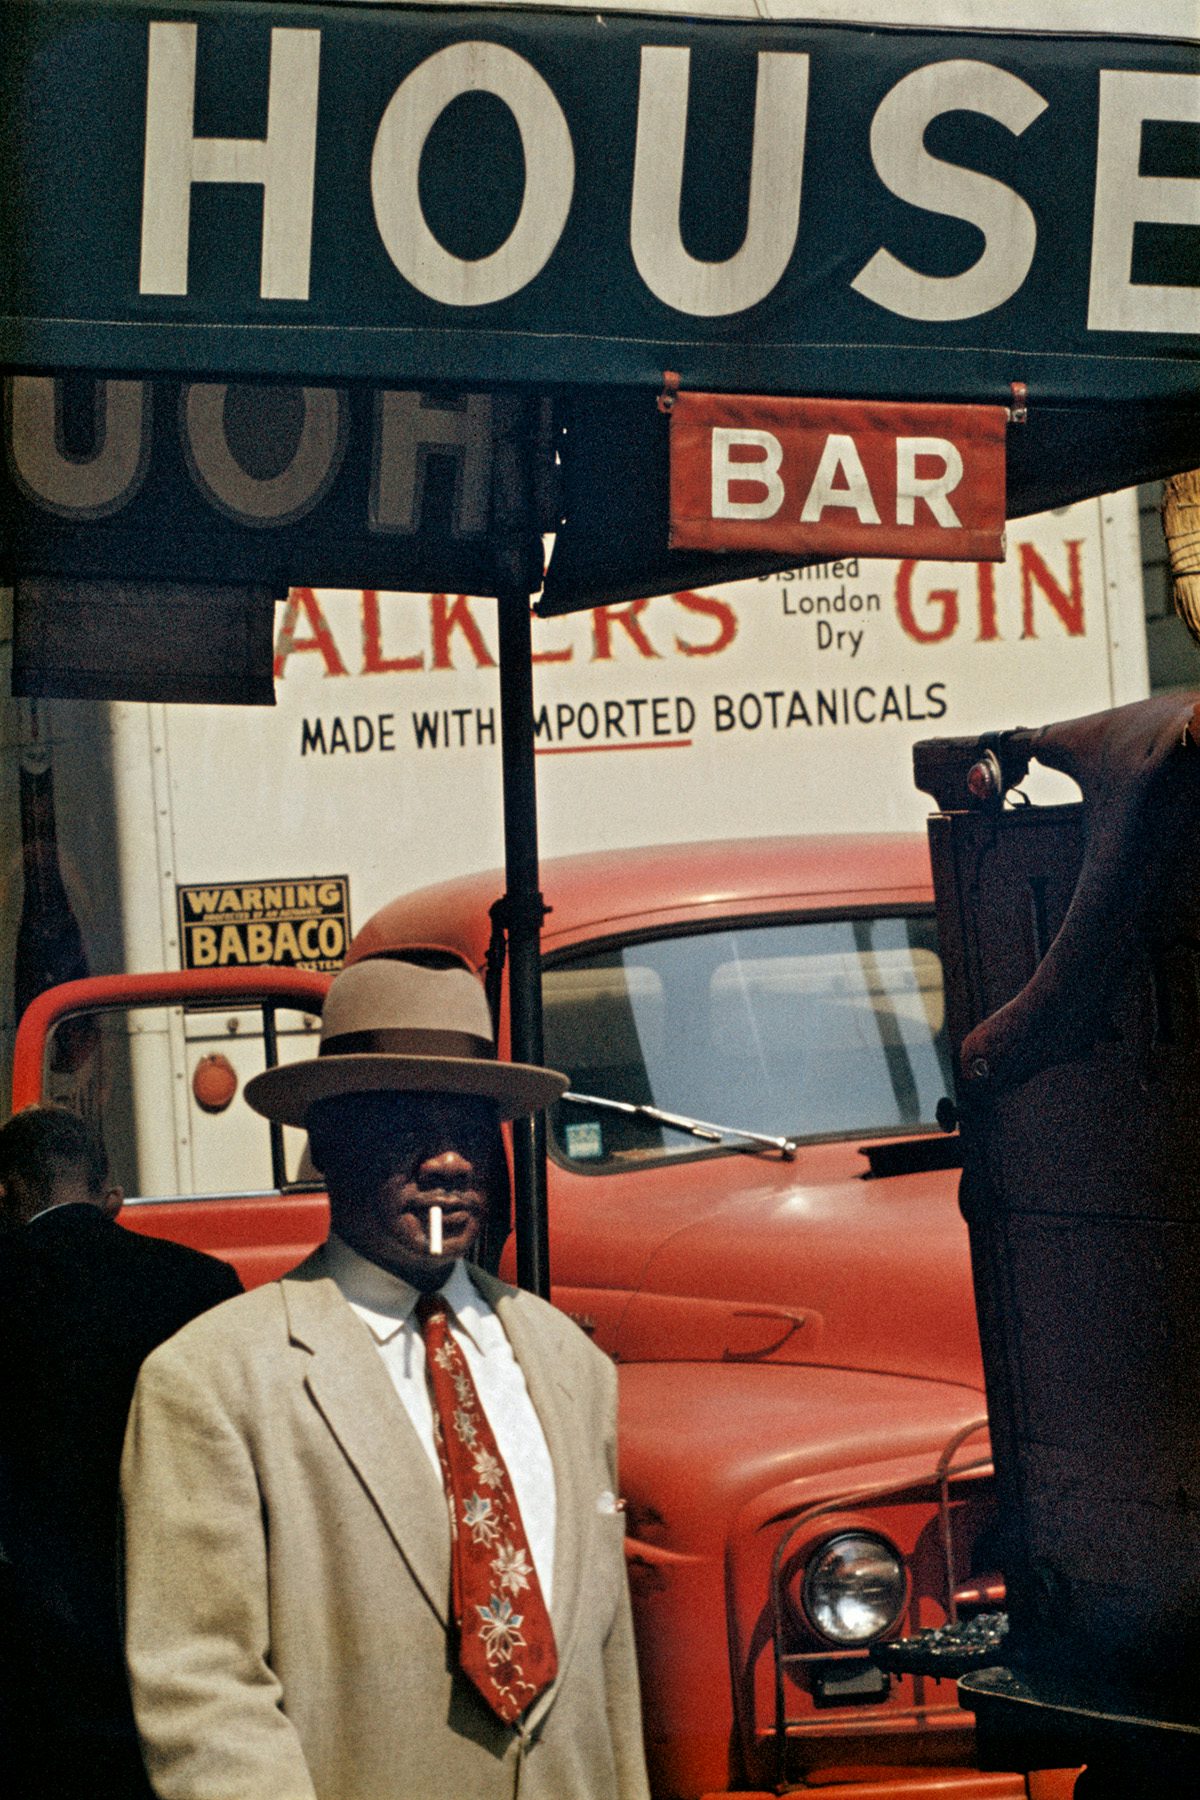 Photograph by Saul Leiter showing a man standing in front of a red vehicle wearing a camel coloured hat and suit with a cigarette in his mouth